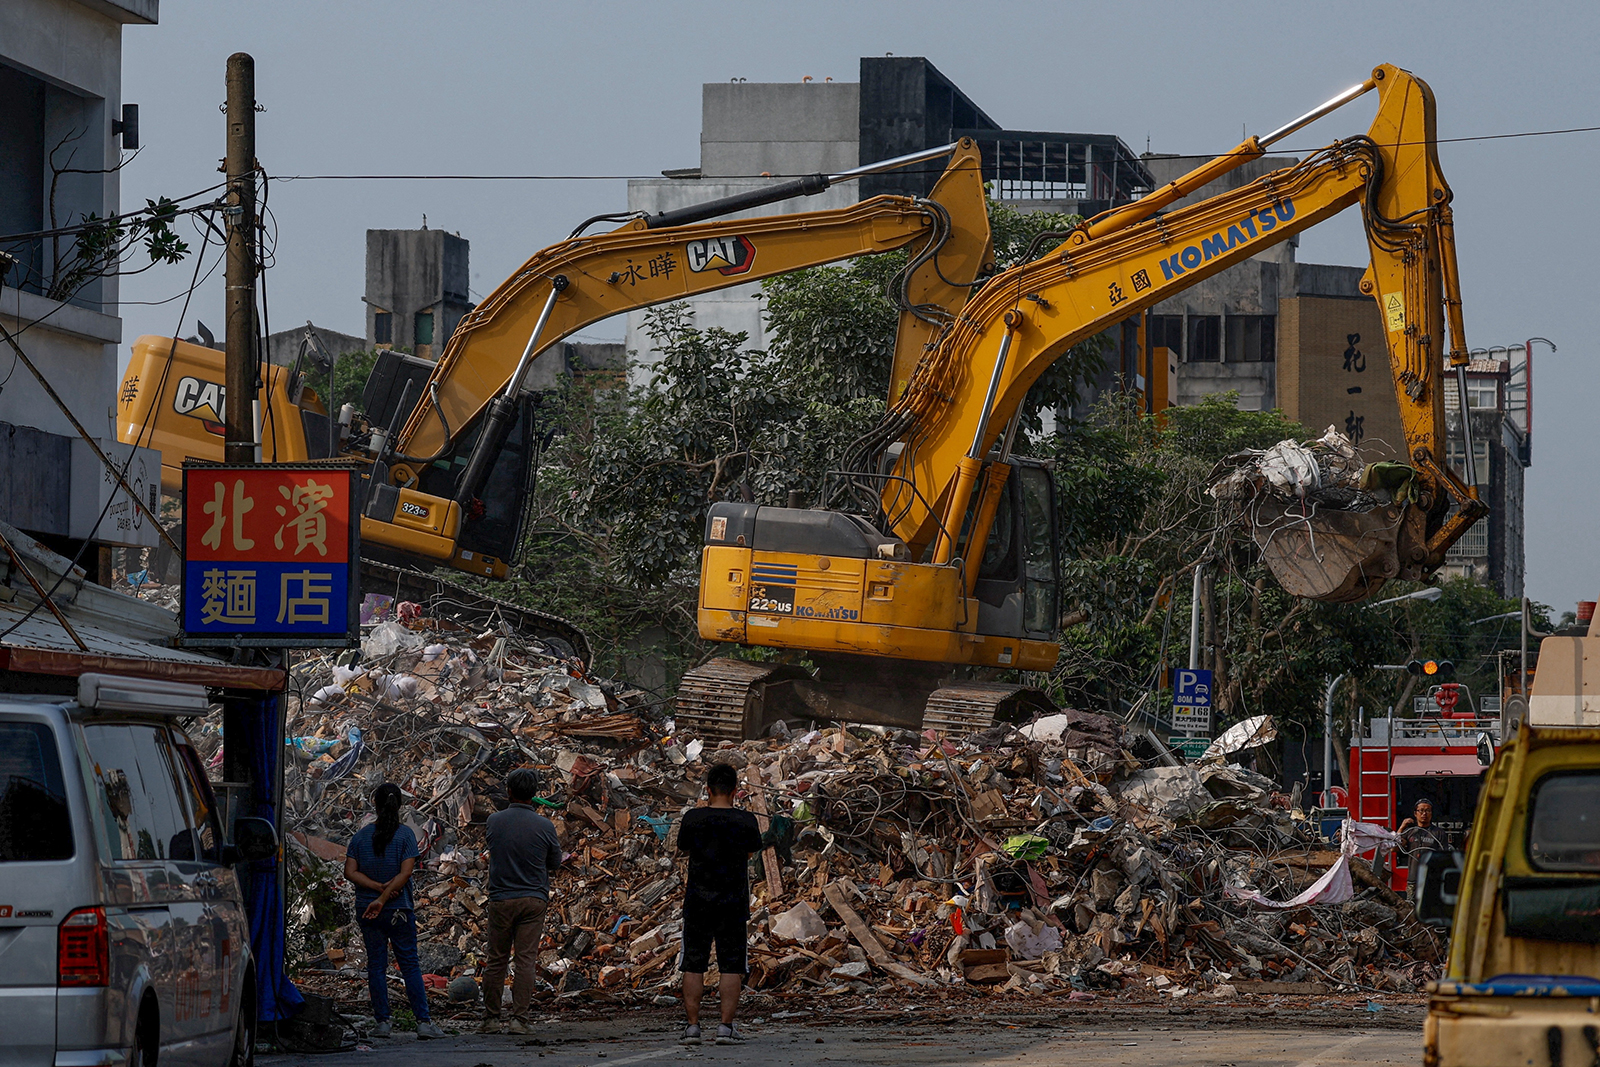 Workers demolish a damaged building following the earthquake, in Hualien, Taiwan April 4.